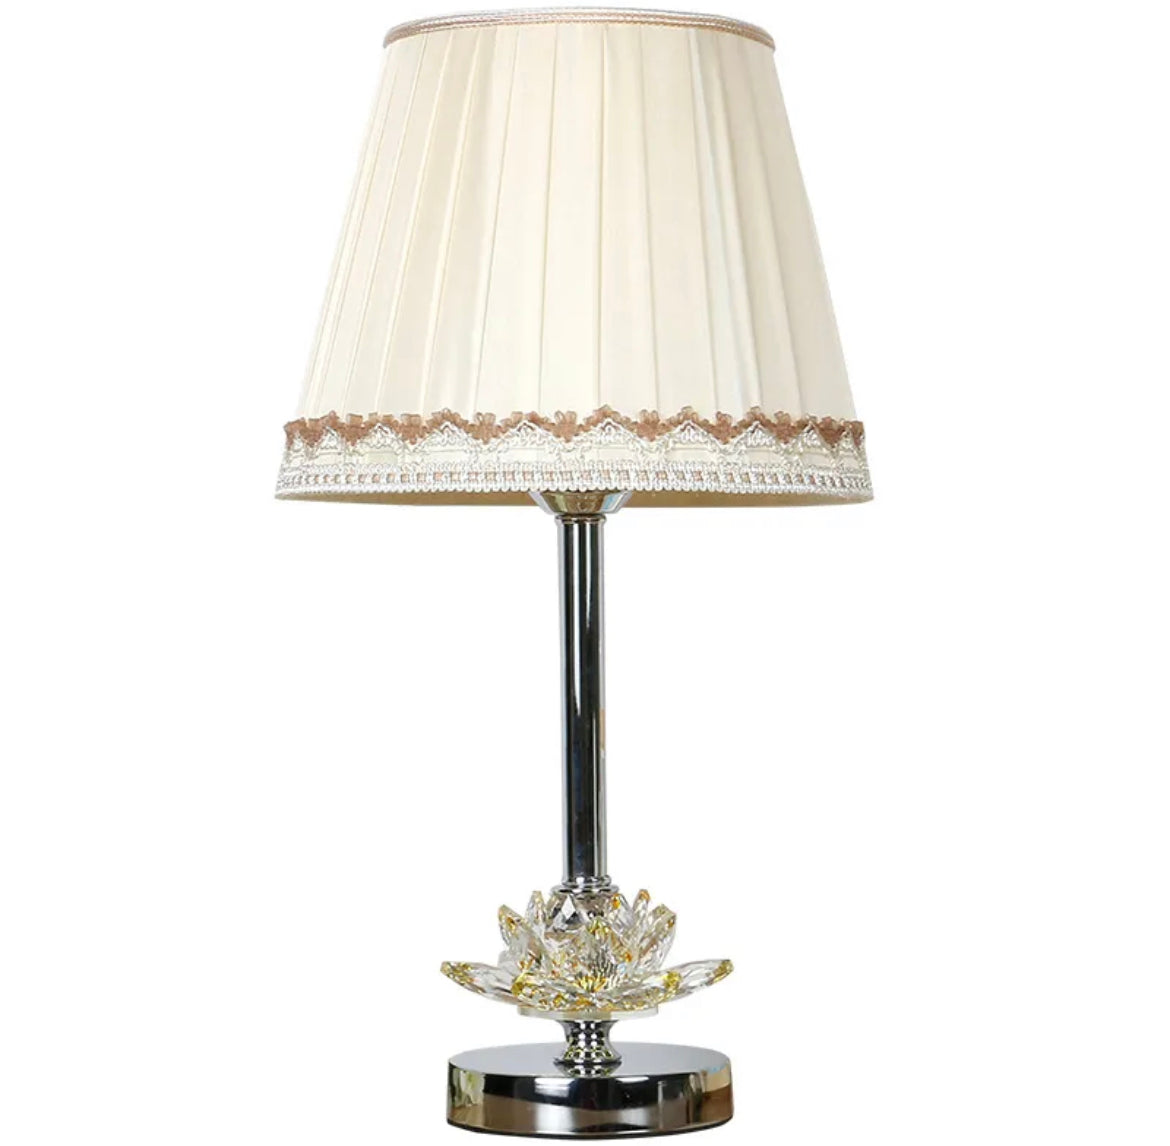 Table Lamp Cordless Fabric Shade Antique Nordic Design Crystal Lamp